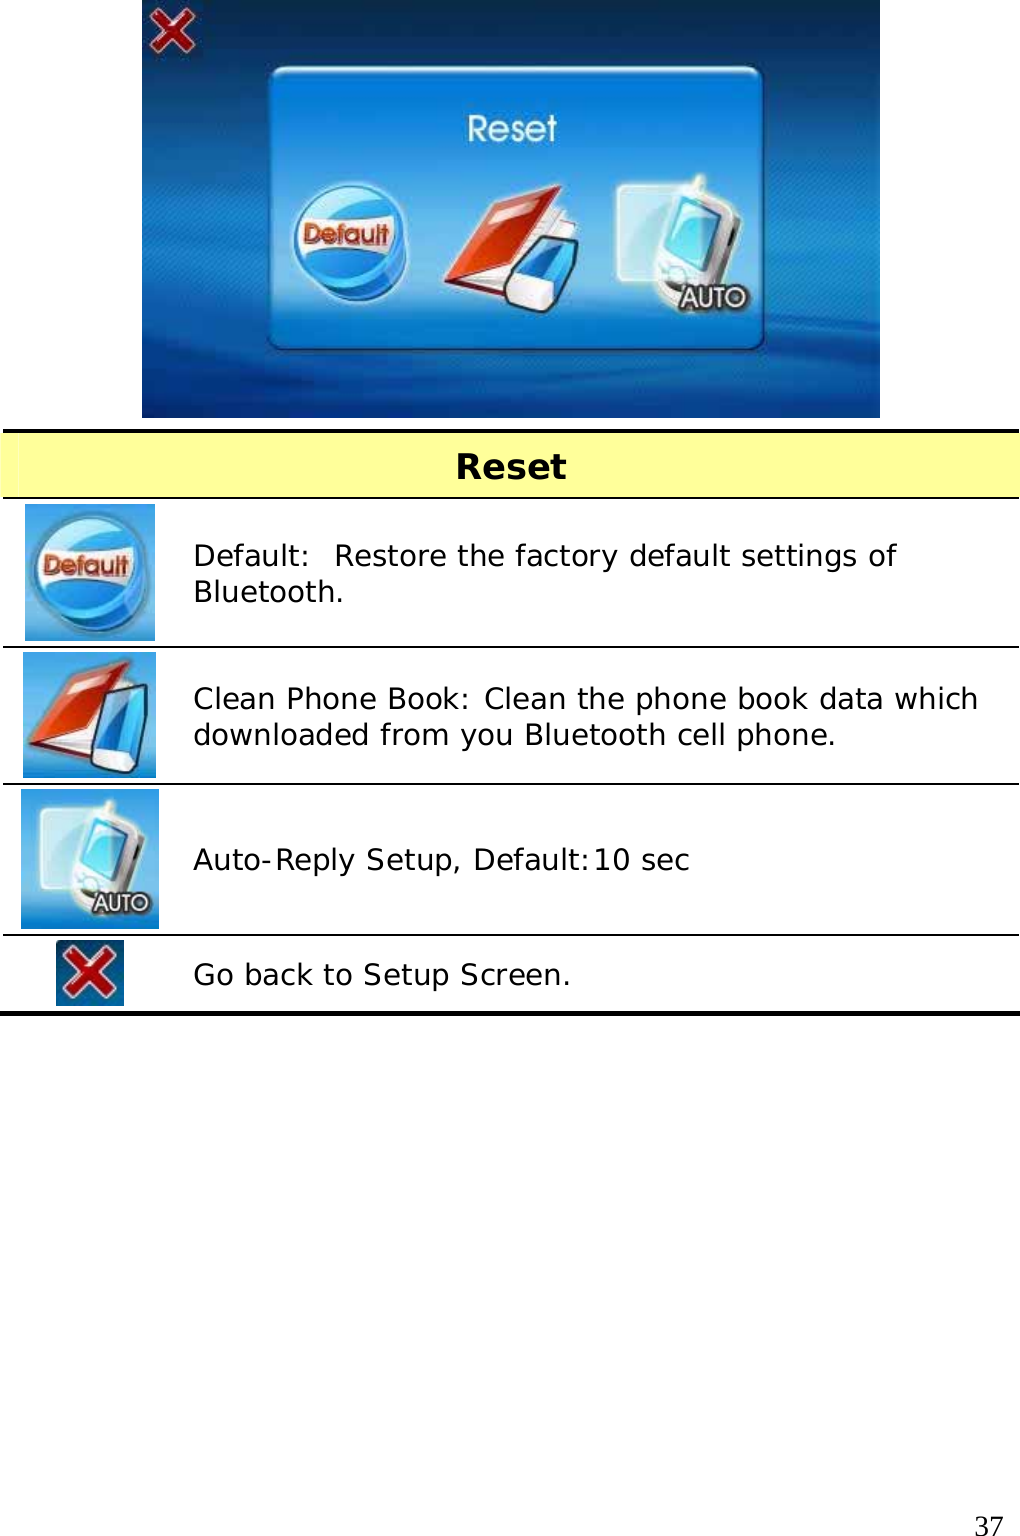  37  Reset  Default:  Restore the factory default settings of Bluetooth.  Clean Phone Book: Clean the phone book data which downloaded from you Bluetooth cell phone.  Auto-Reply Setup, Default:10 sec  Go back to Setup Screen.   